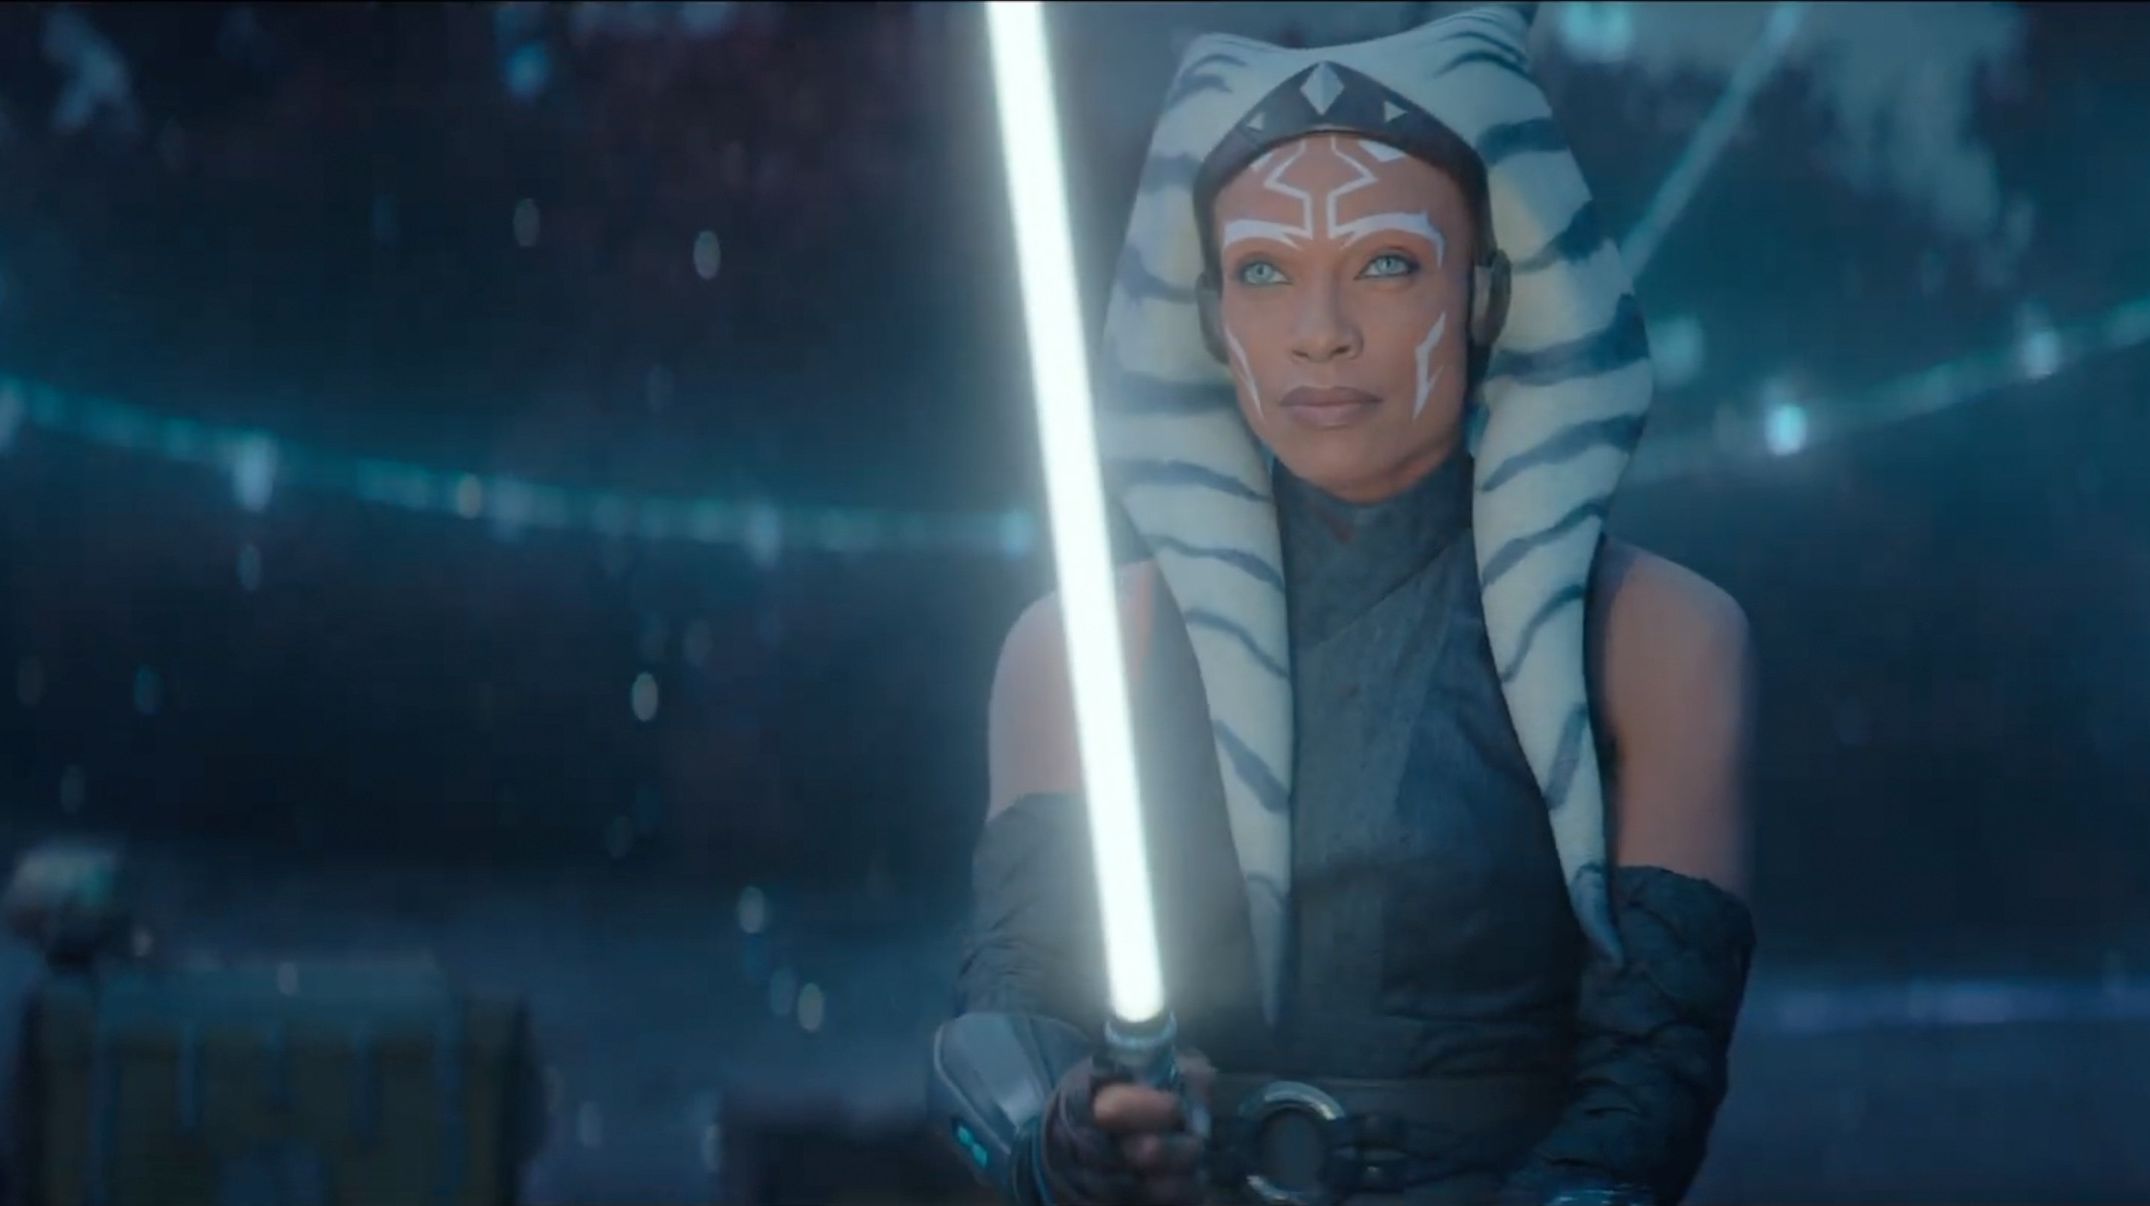 Every upcoming Star Wars project, from Ahsoka to Daisy Ridley's return